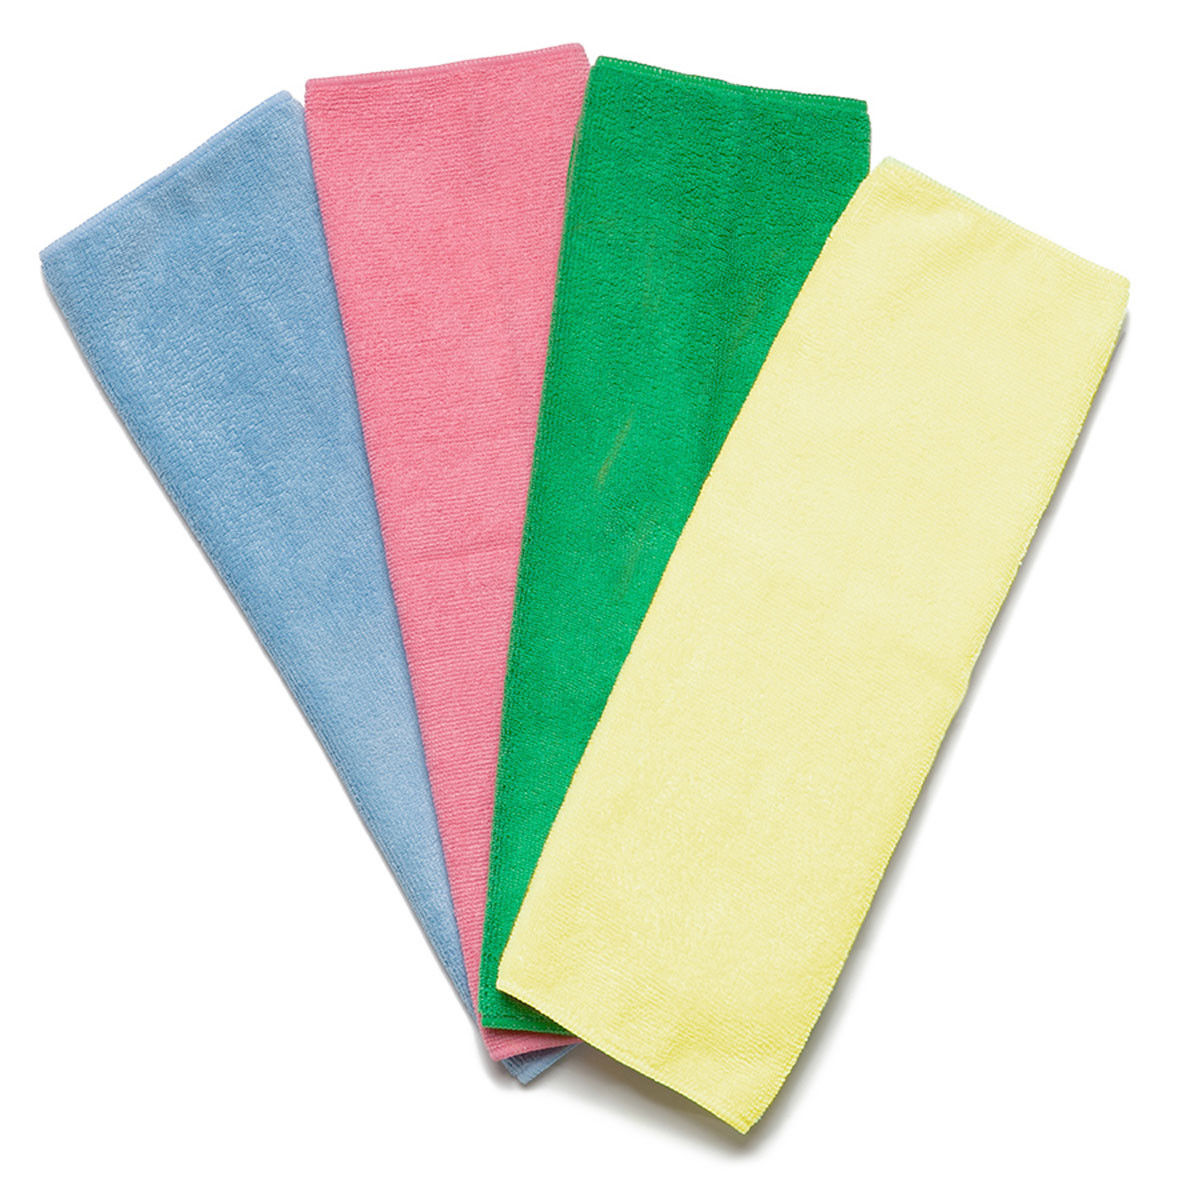 What colors are available for these bulk microfiber towels?